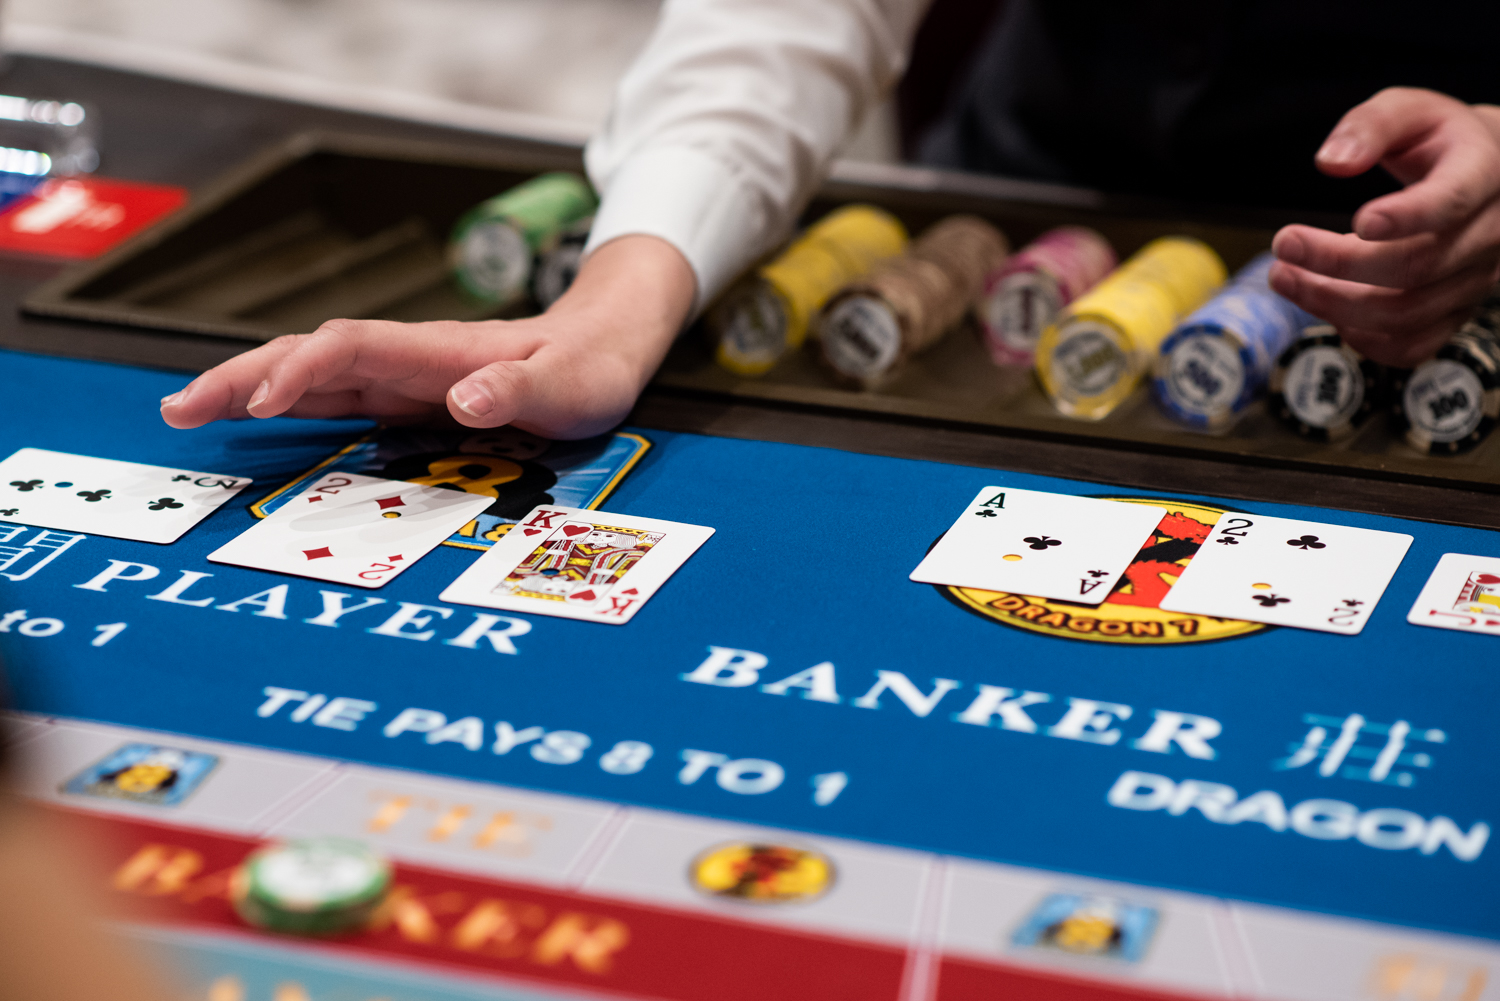 When it comes to playing Baccarat, understanding the odds and probabilities can enhance your gaming experience and help you make informed decisions.